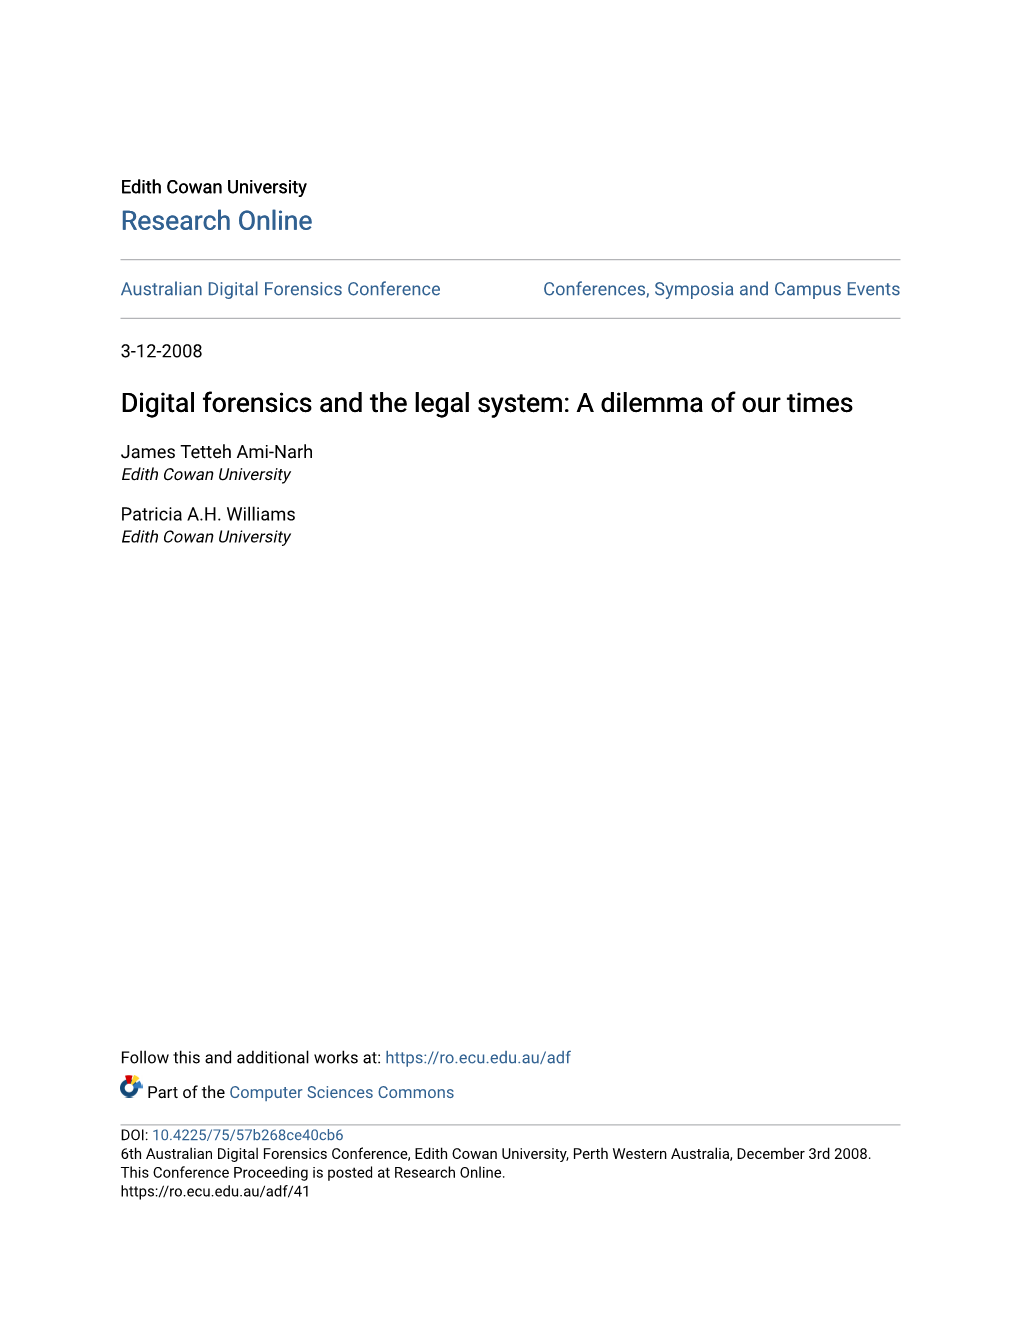 Digital Forensics and the Legal System: a Dilemma of Our Times